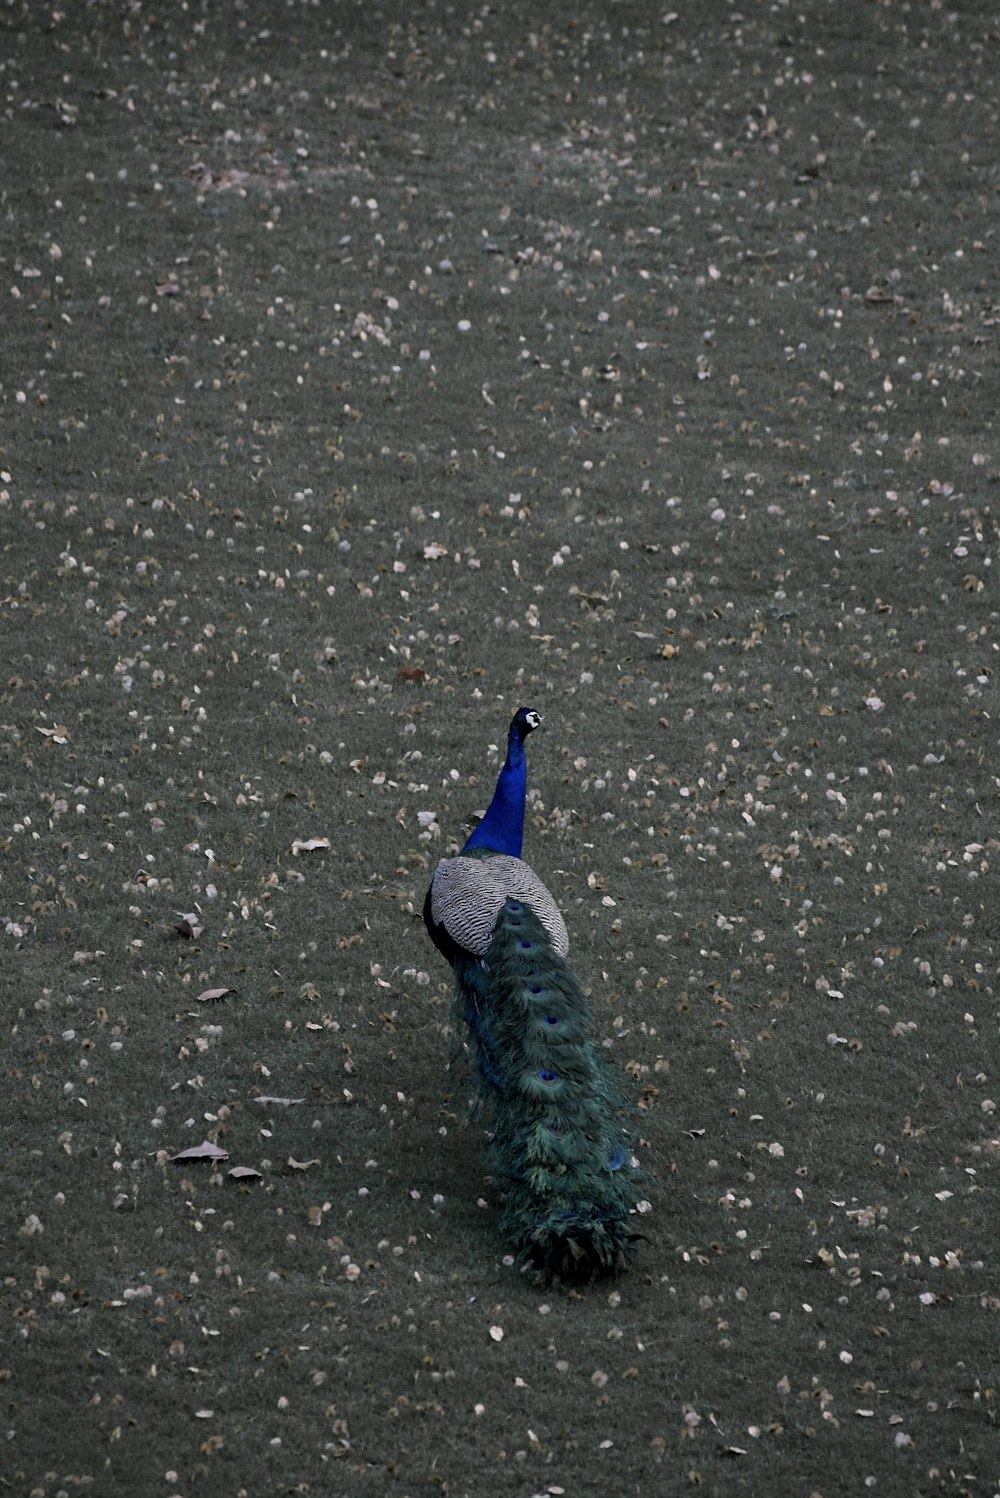 a blue and white bird with a long tail